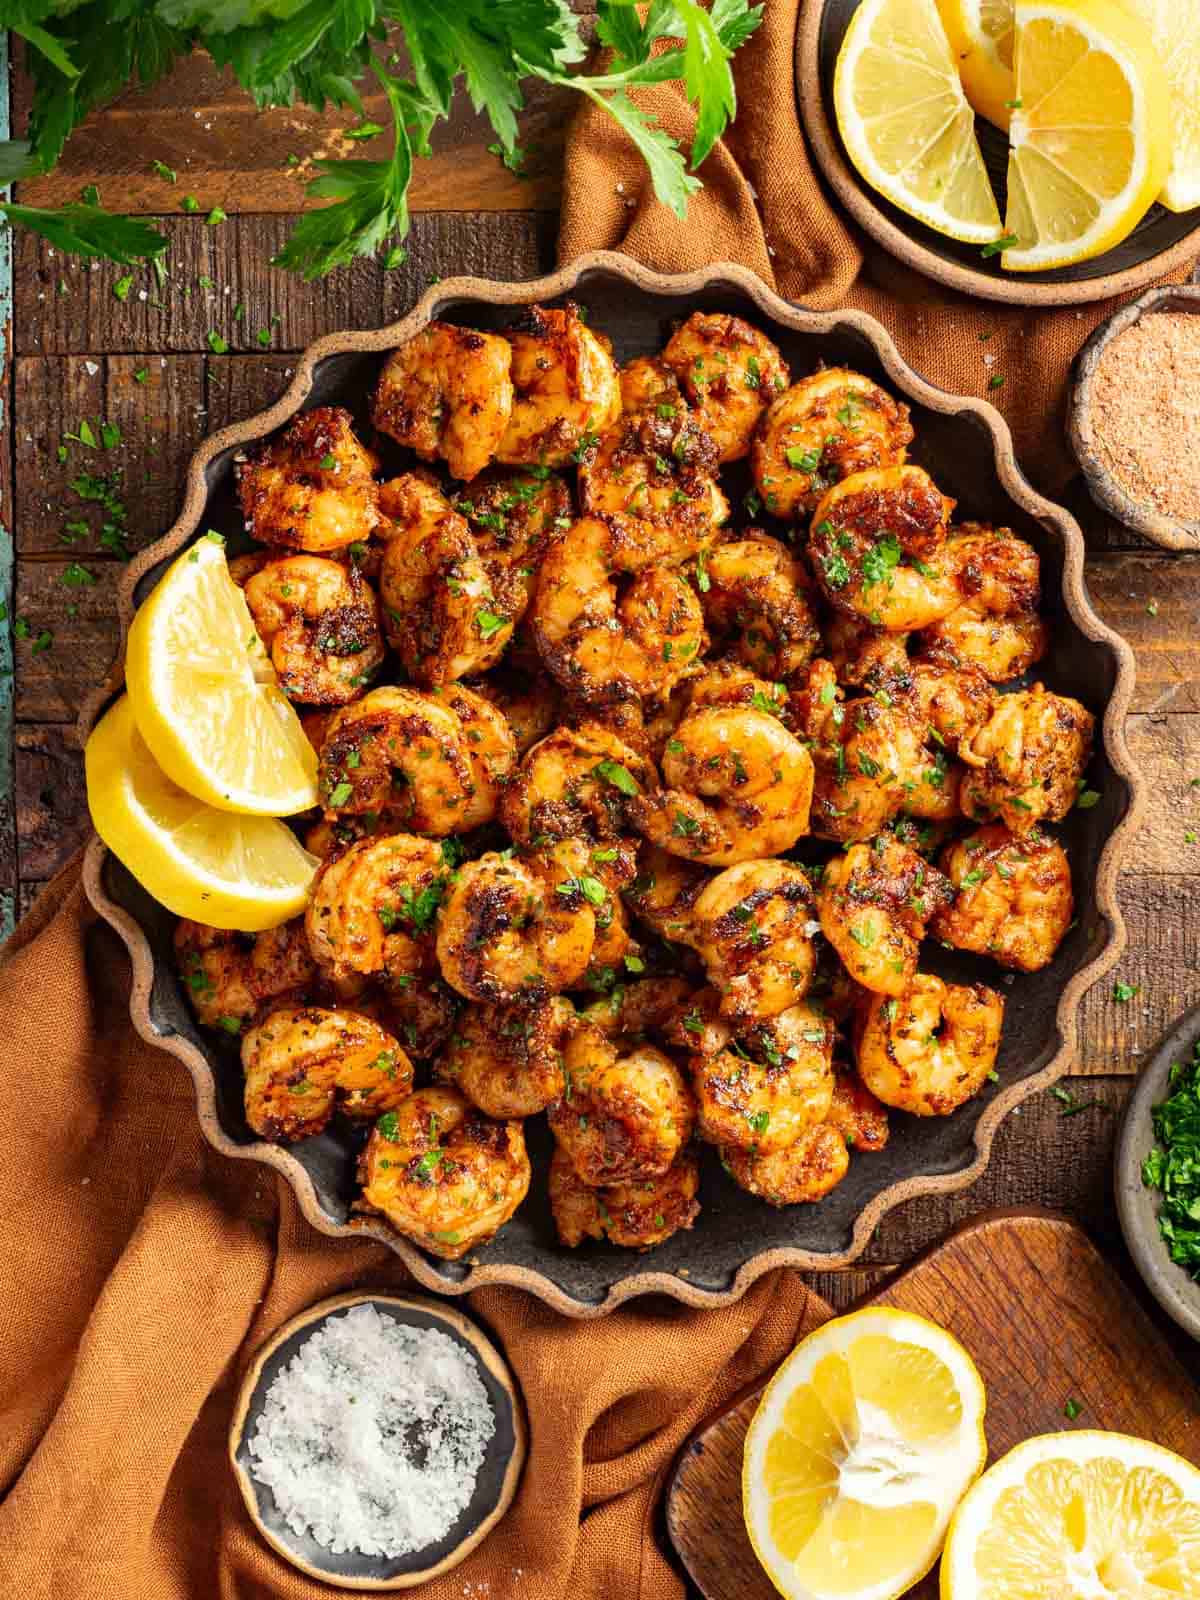 A plate of blackened shrimp topped with lemon and parsley